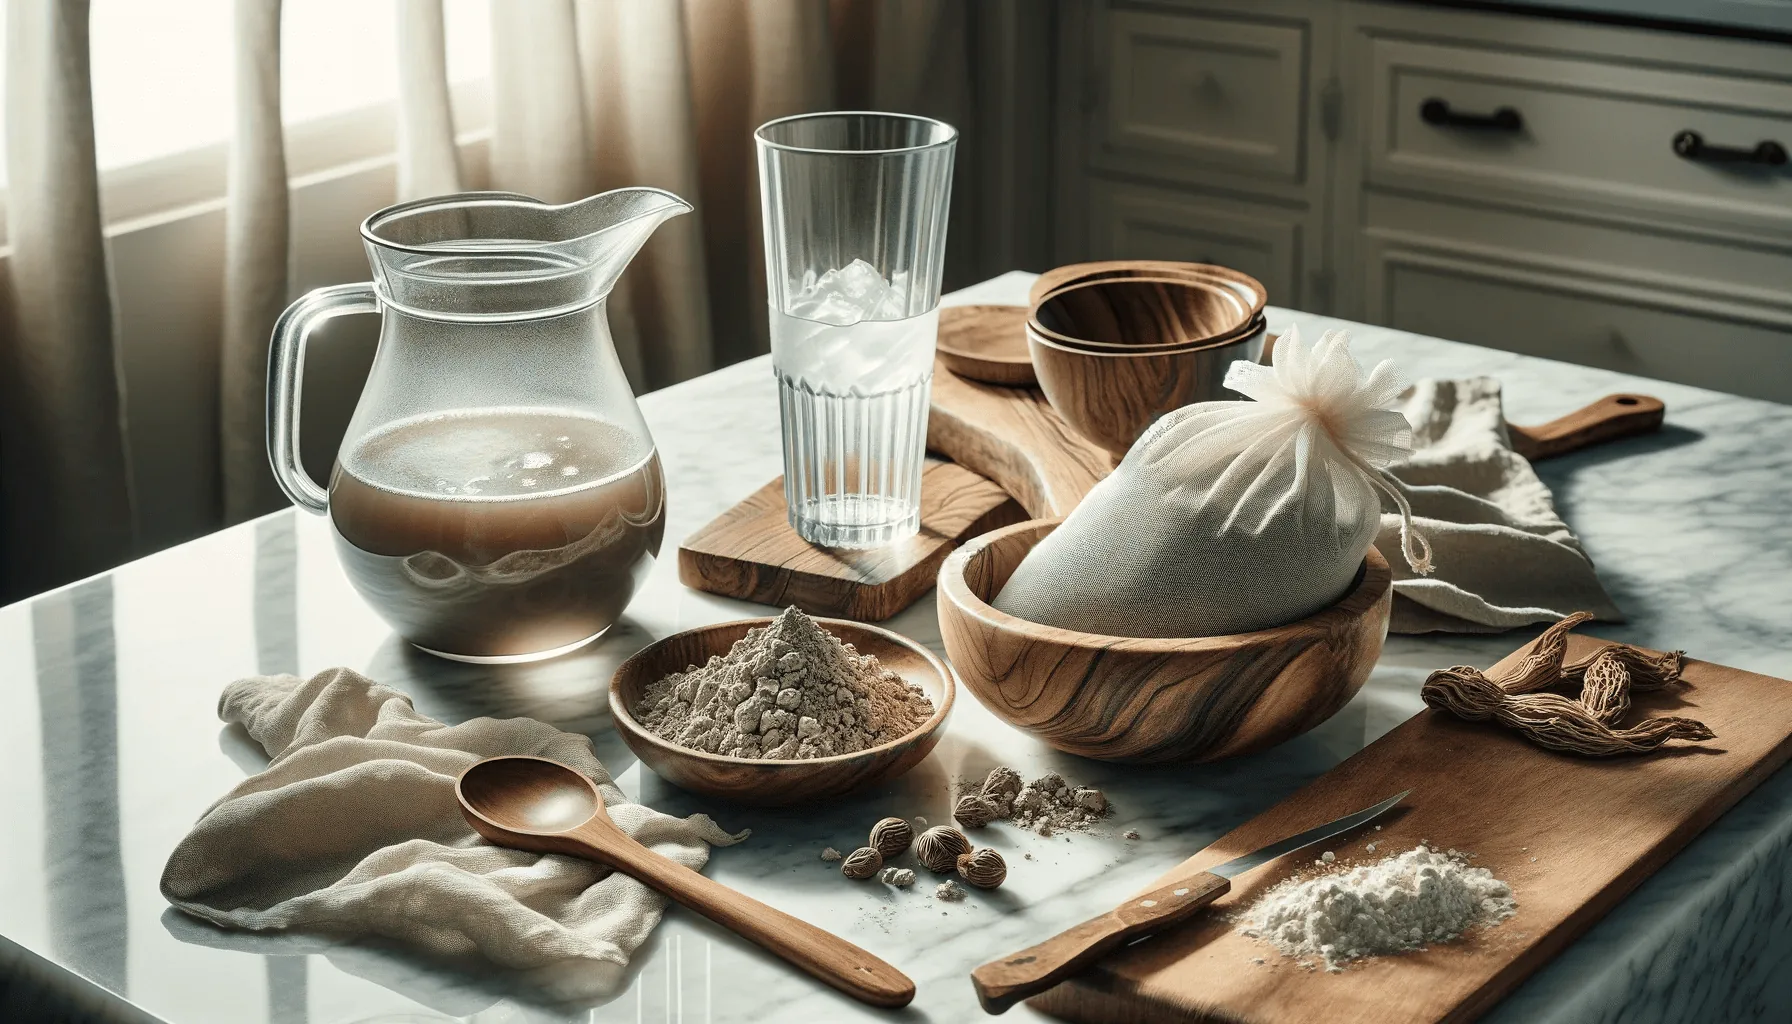 Kava root powder, water pitcher, and a strainer are neatly arranged